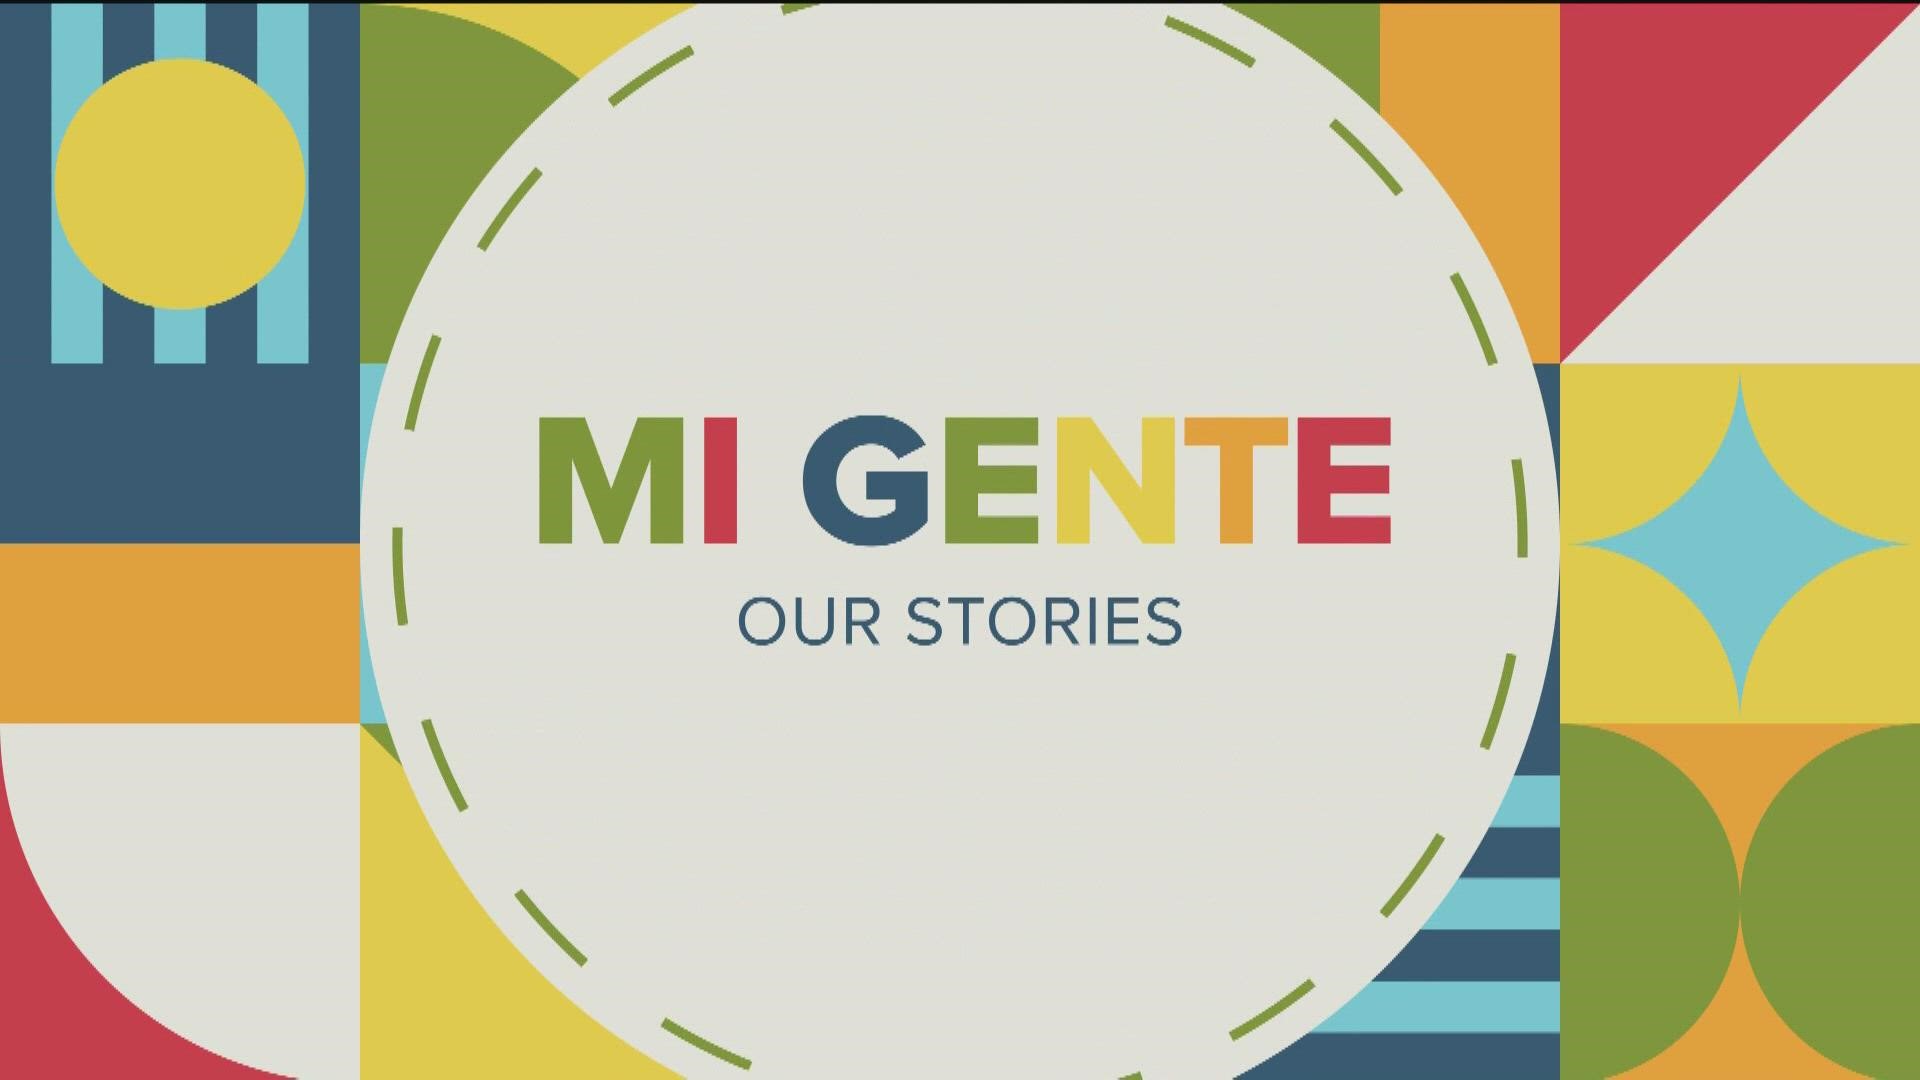 Celebrating the heritage and honoring the culture that makes up San Diego's diverse Hispanic and Latinx community. A collection of stories from KFMB CBS8.